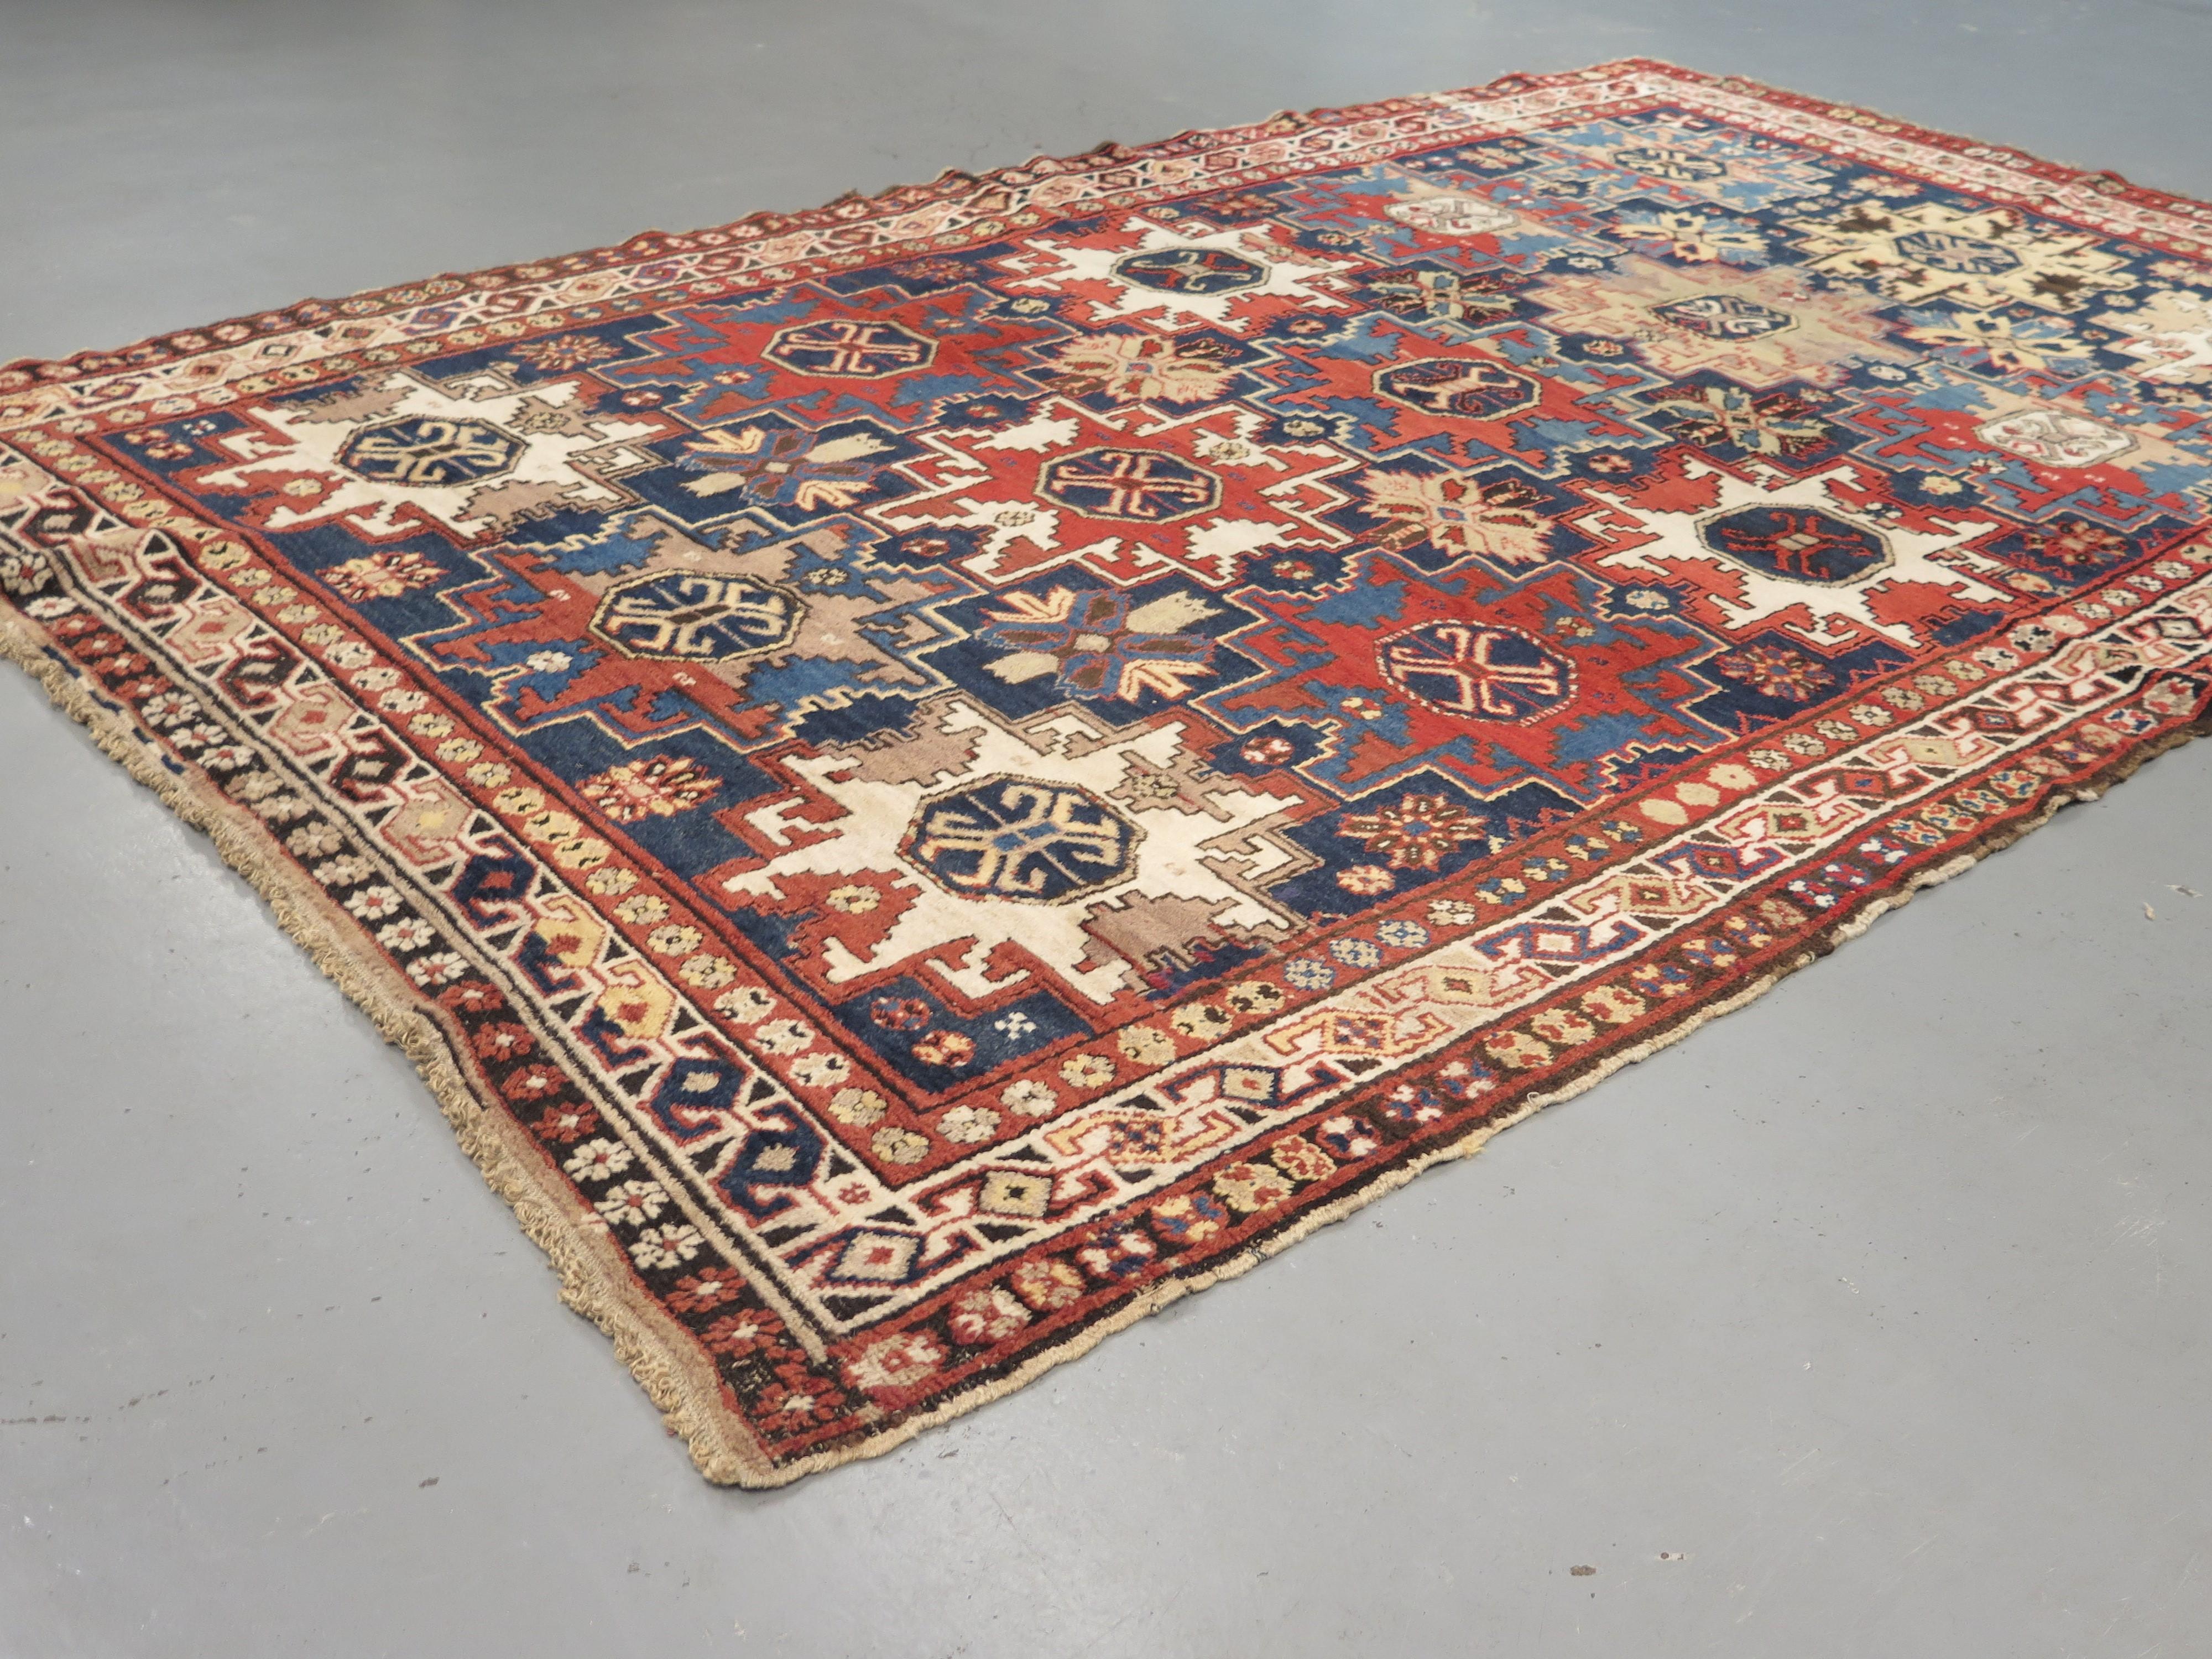 Antique Lesghi rugs, originating in an area now broadly covered by modern-day Azerbaijan, represent some of the finest carpets from the region, well known for their bold, graphic designs, combining an expressive tribal charm with high-quality